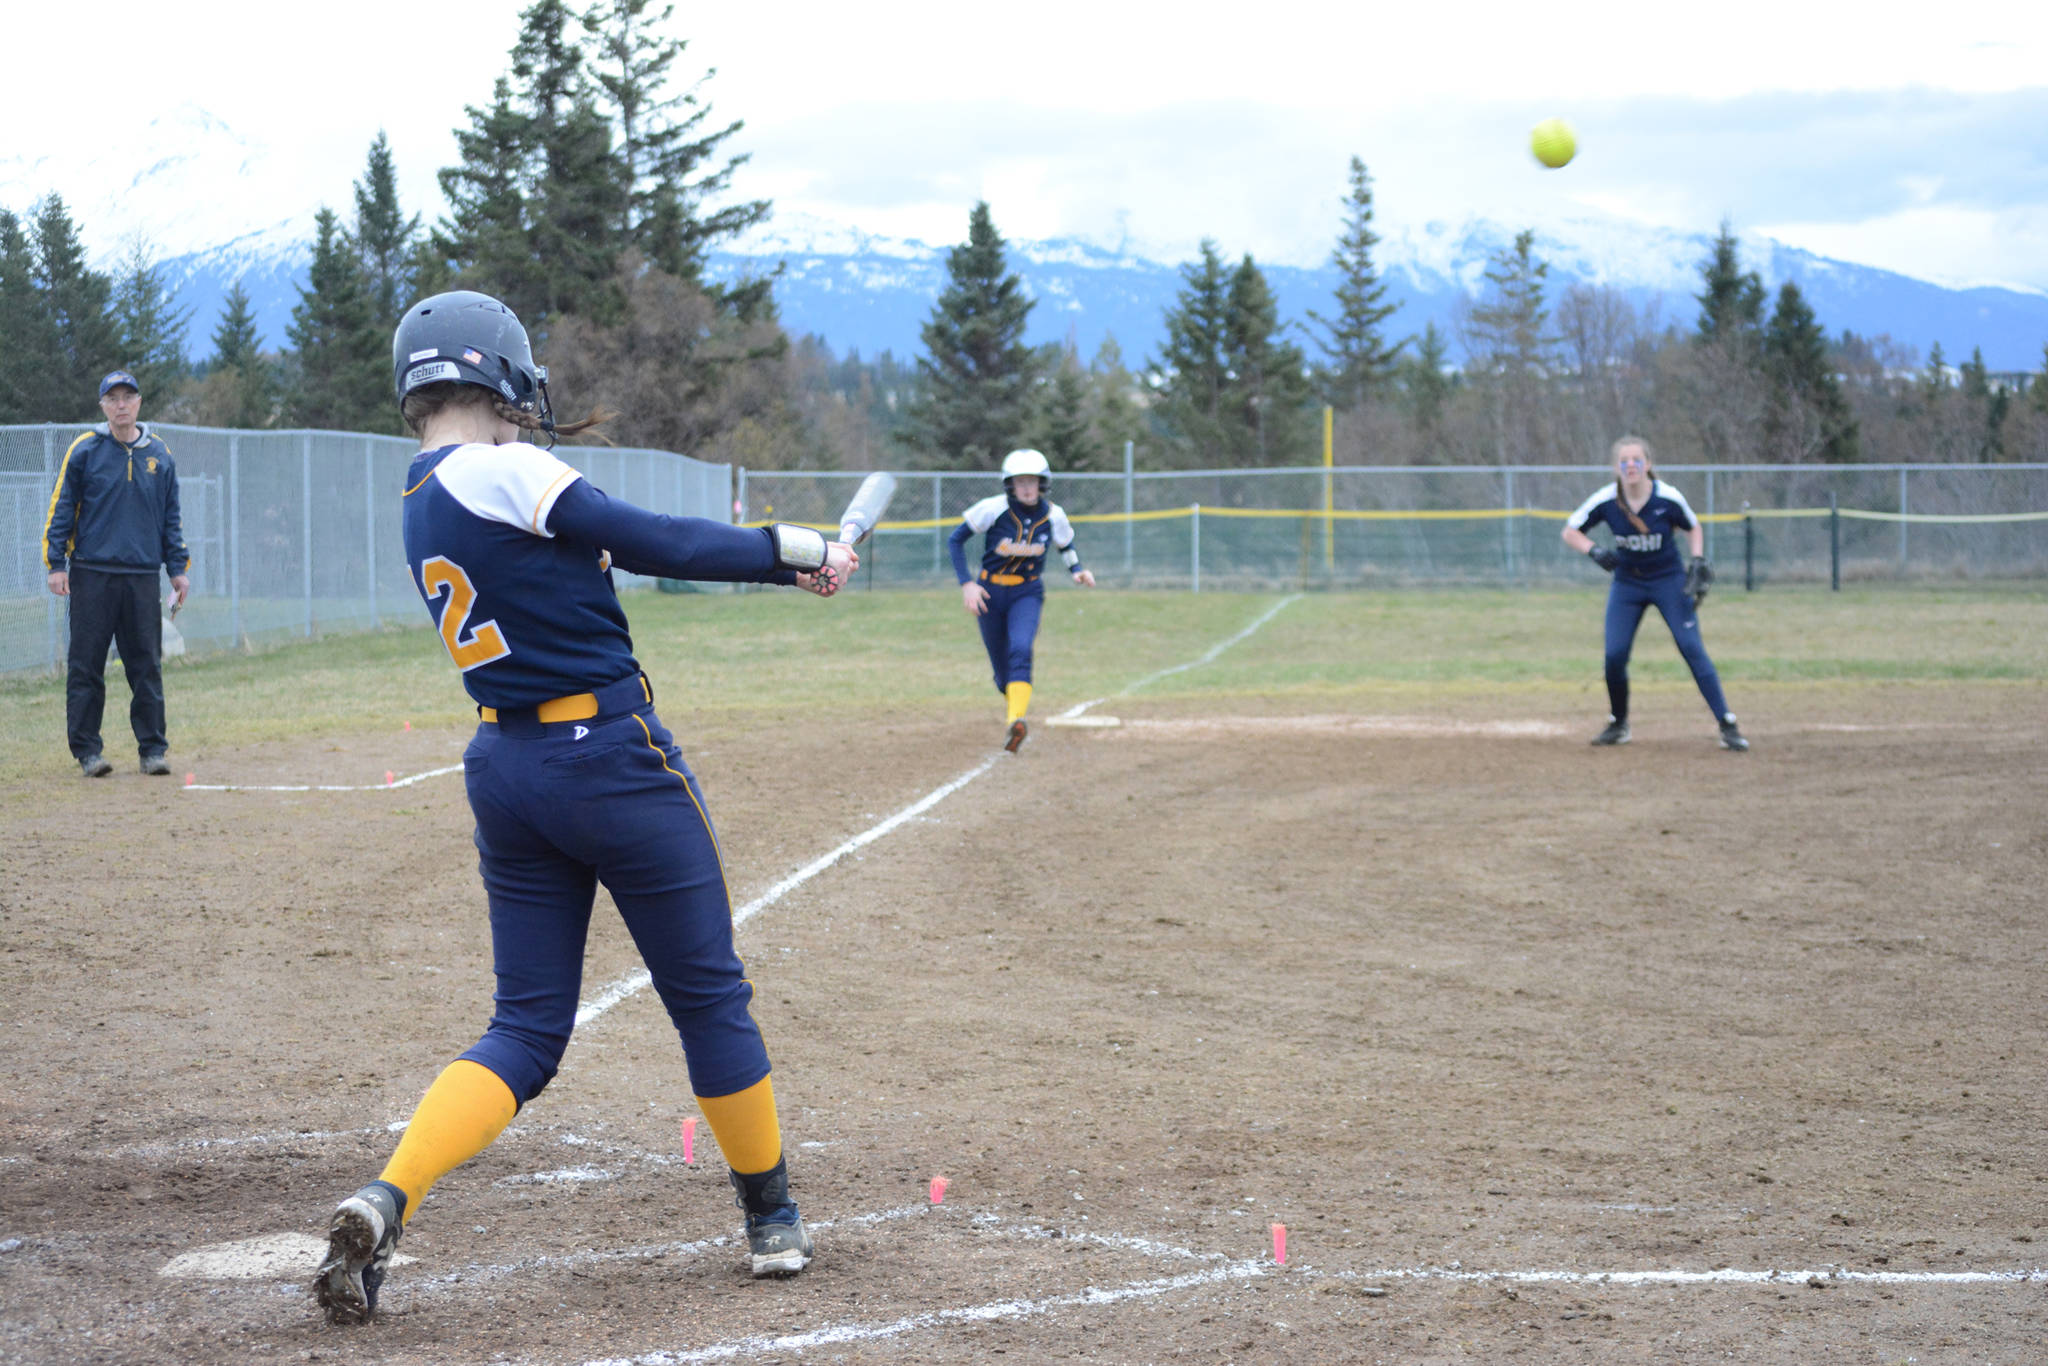 Homer High School Mariners softball batter Grace Godfrey slams the ball as Becca Chapman prepares to run to home on Tuesday, April 30, 2019, against Soldotna High School at Jack Gist Park in Homer, Alaska. (Photo by Michael Armstrong/Homer News)